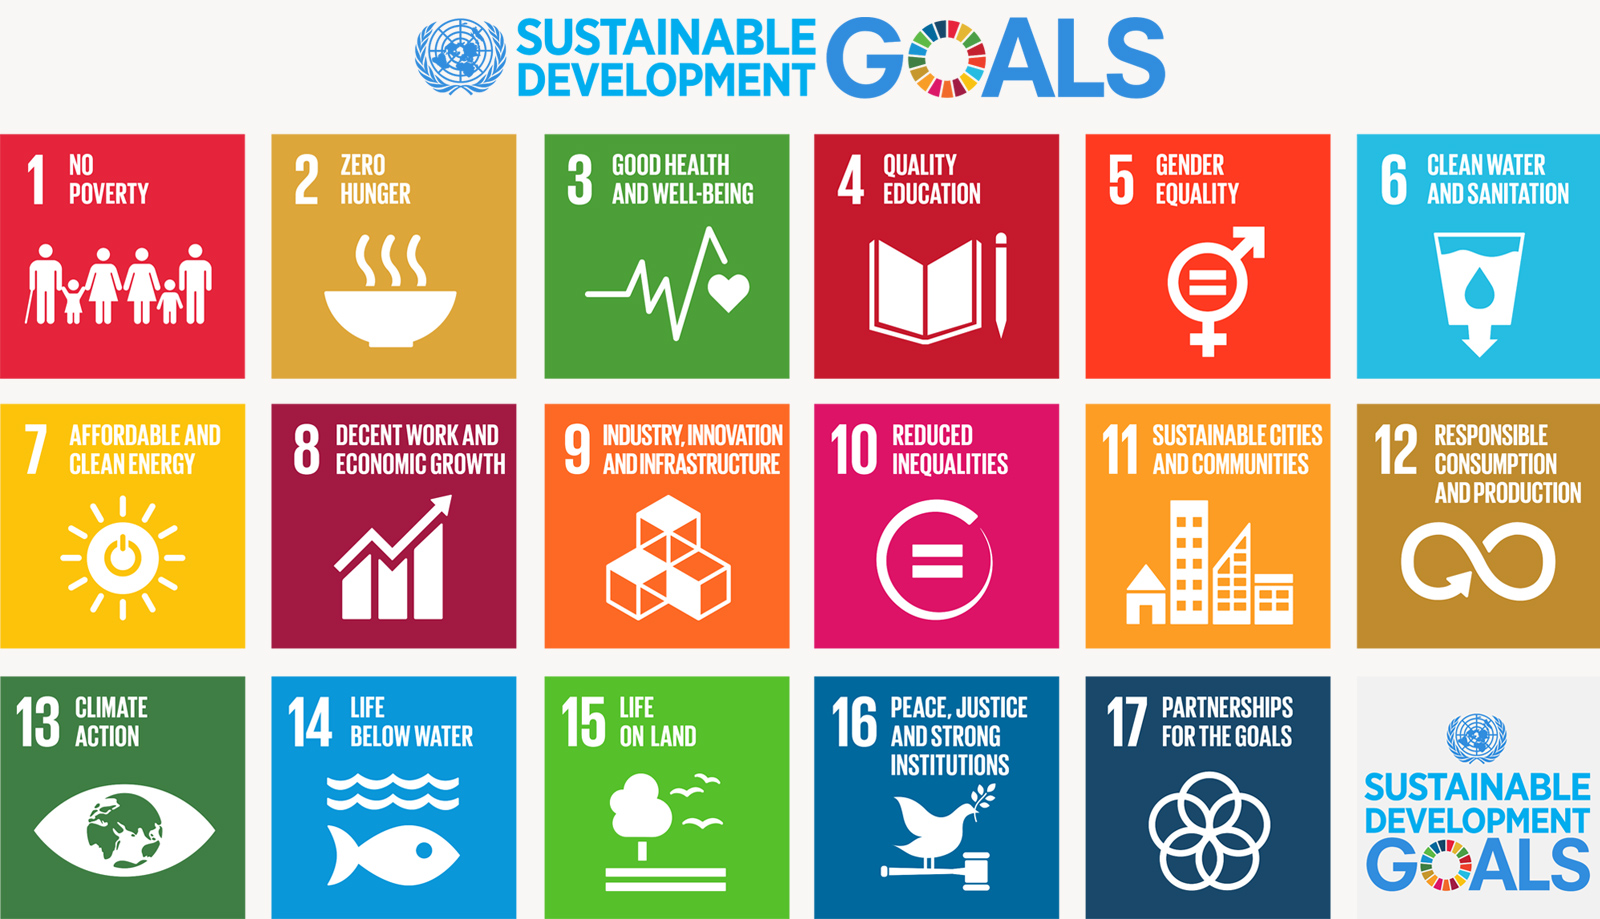 We are still getting familiar with the SDGs